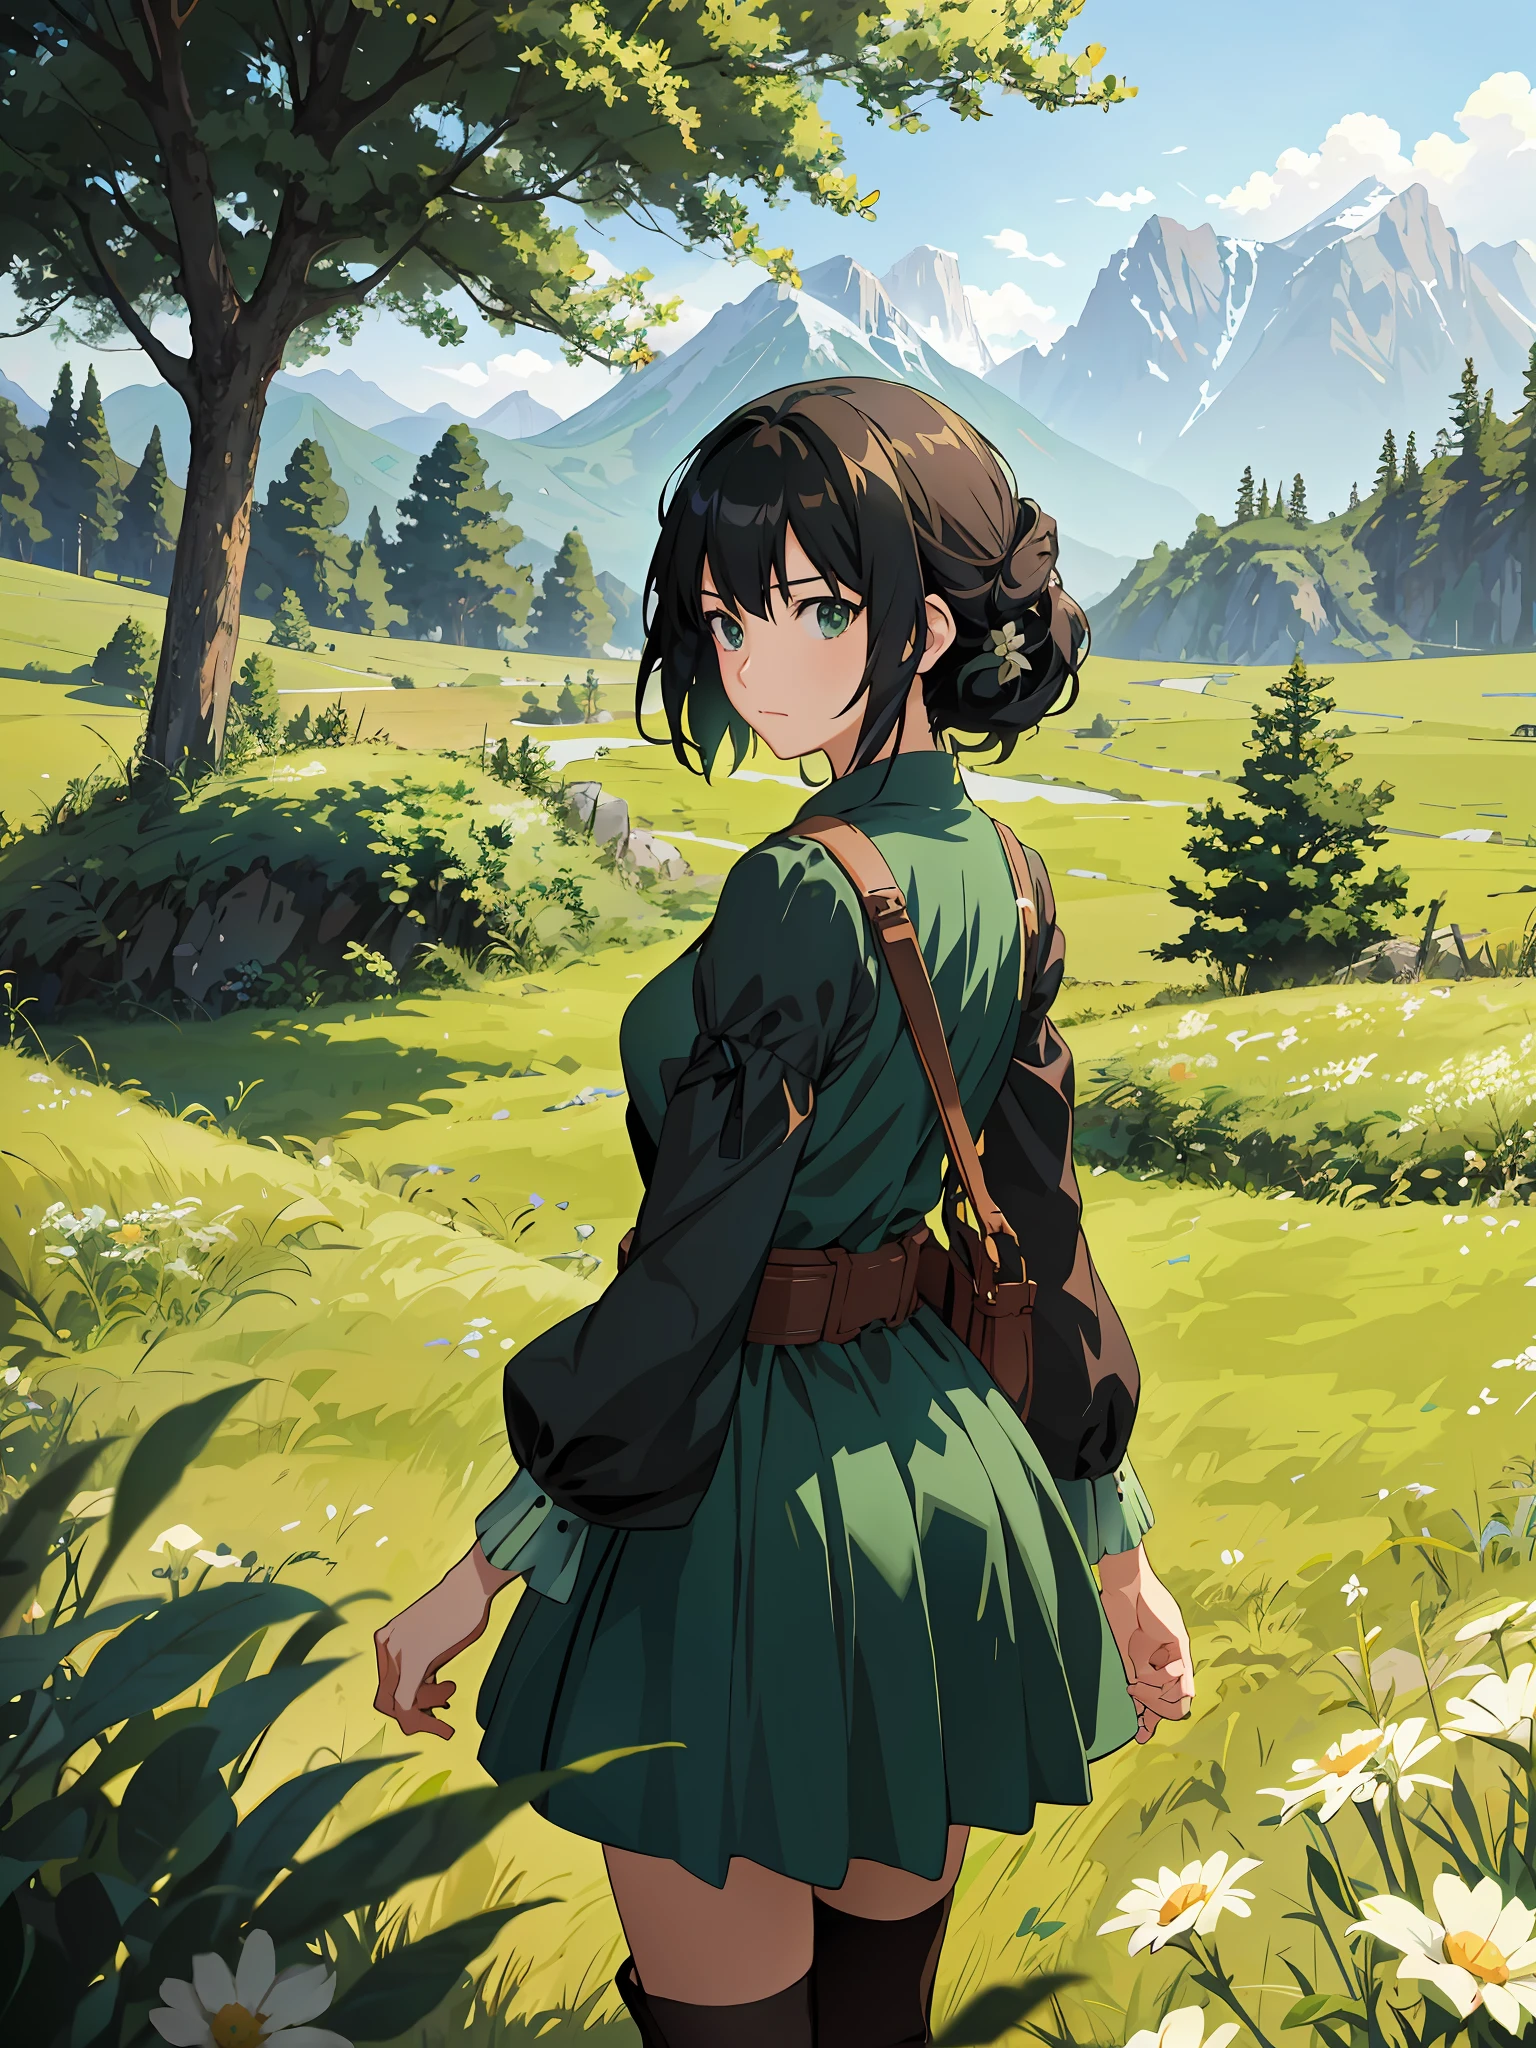 Anime girl standing in field with mountains in background in green dress, detailed digital anime art, Guvez style artwork, Artgerm and Atey Ghailan, Makoto Shinkai art style, digital anime art, digital anime illustration, smooth anime CG art, anime country landscape, 2.5 D CGI anime fantasy artwork